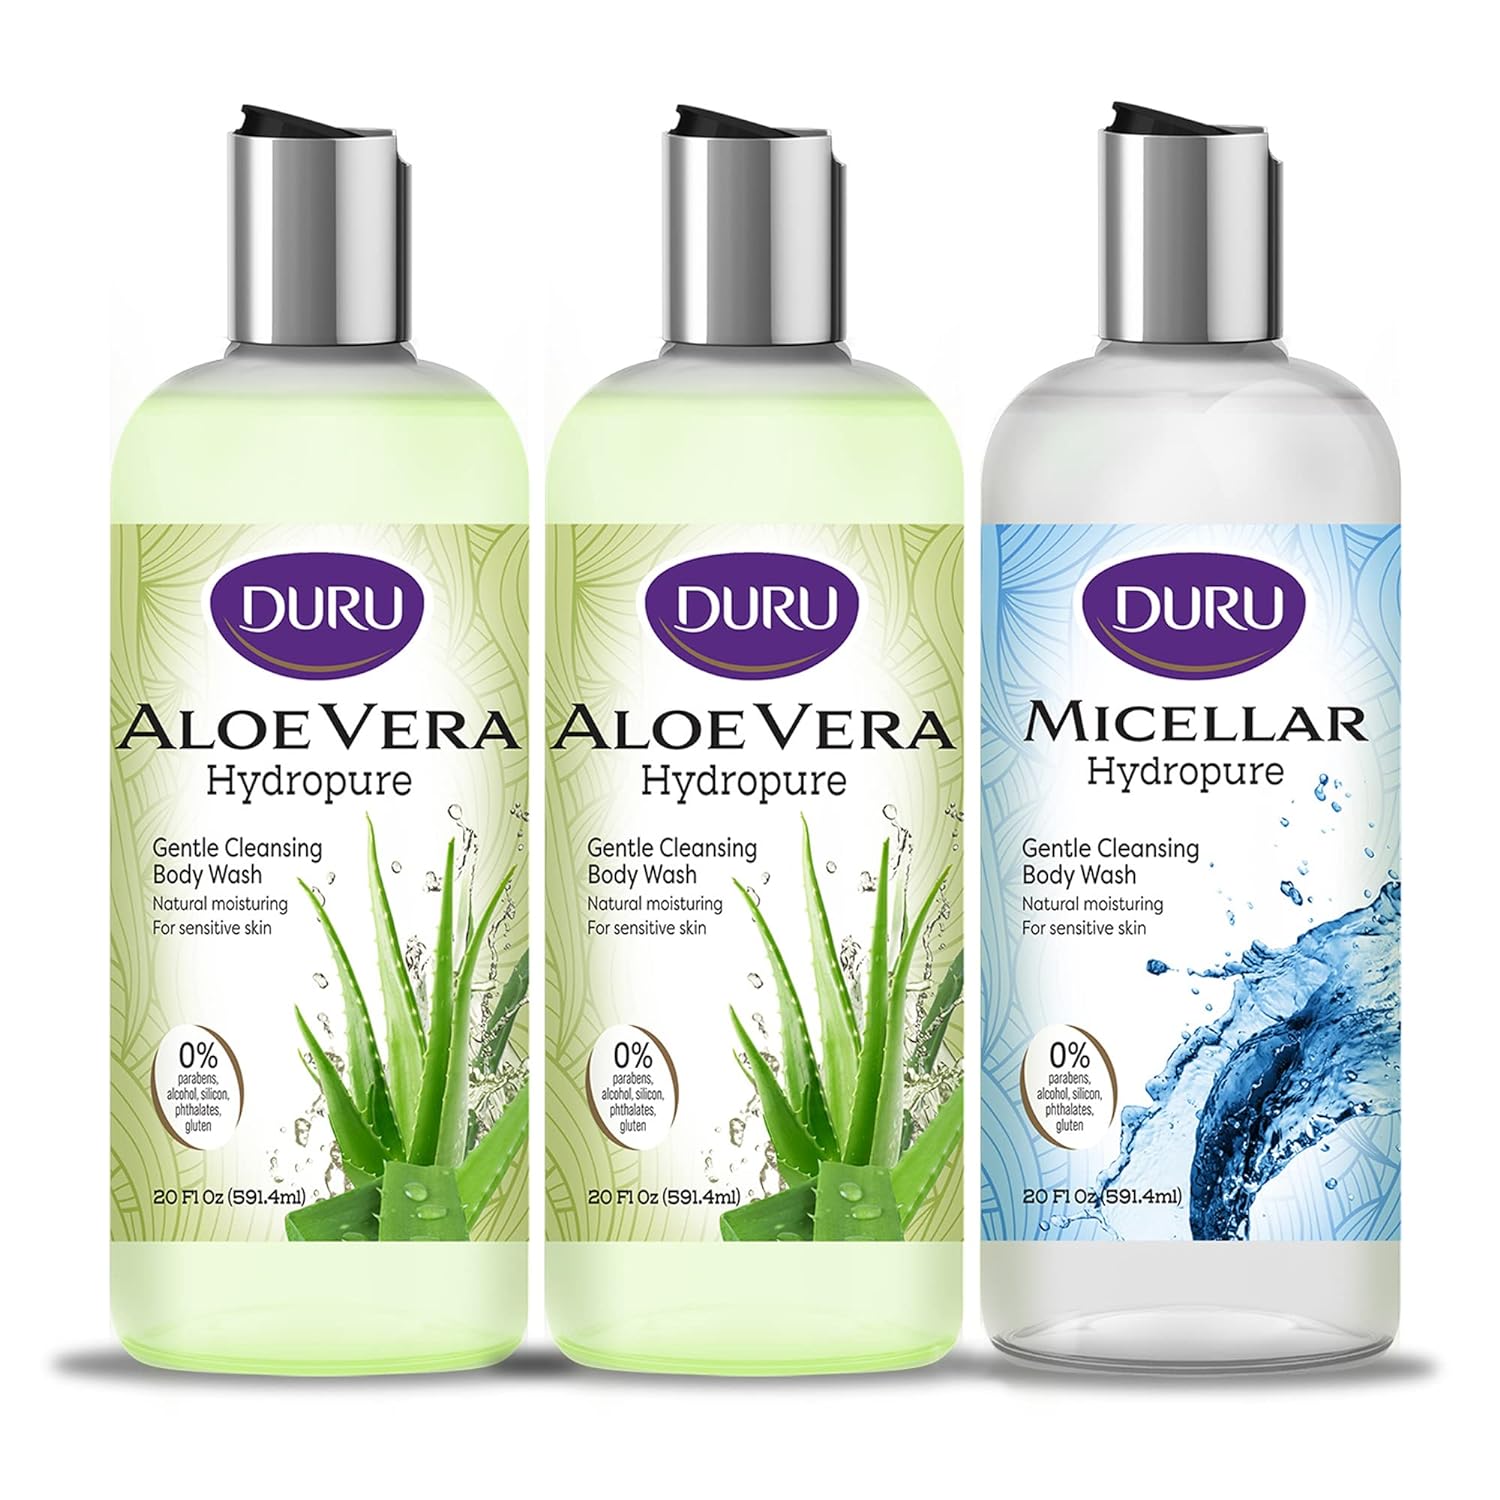 Duru Superfood Aloe Vera and Micellar Water Body Wash - Gentle Cleansing Moisturizing Body Wash Sensitive Skin Body Wash Shower Gel Body Wash for Women and Men Plant Based Skin Care Products - 3 Pack